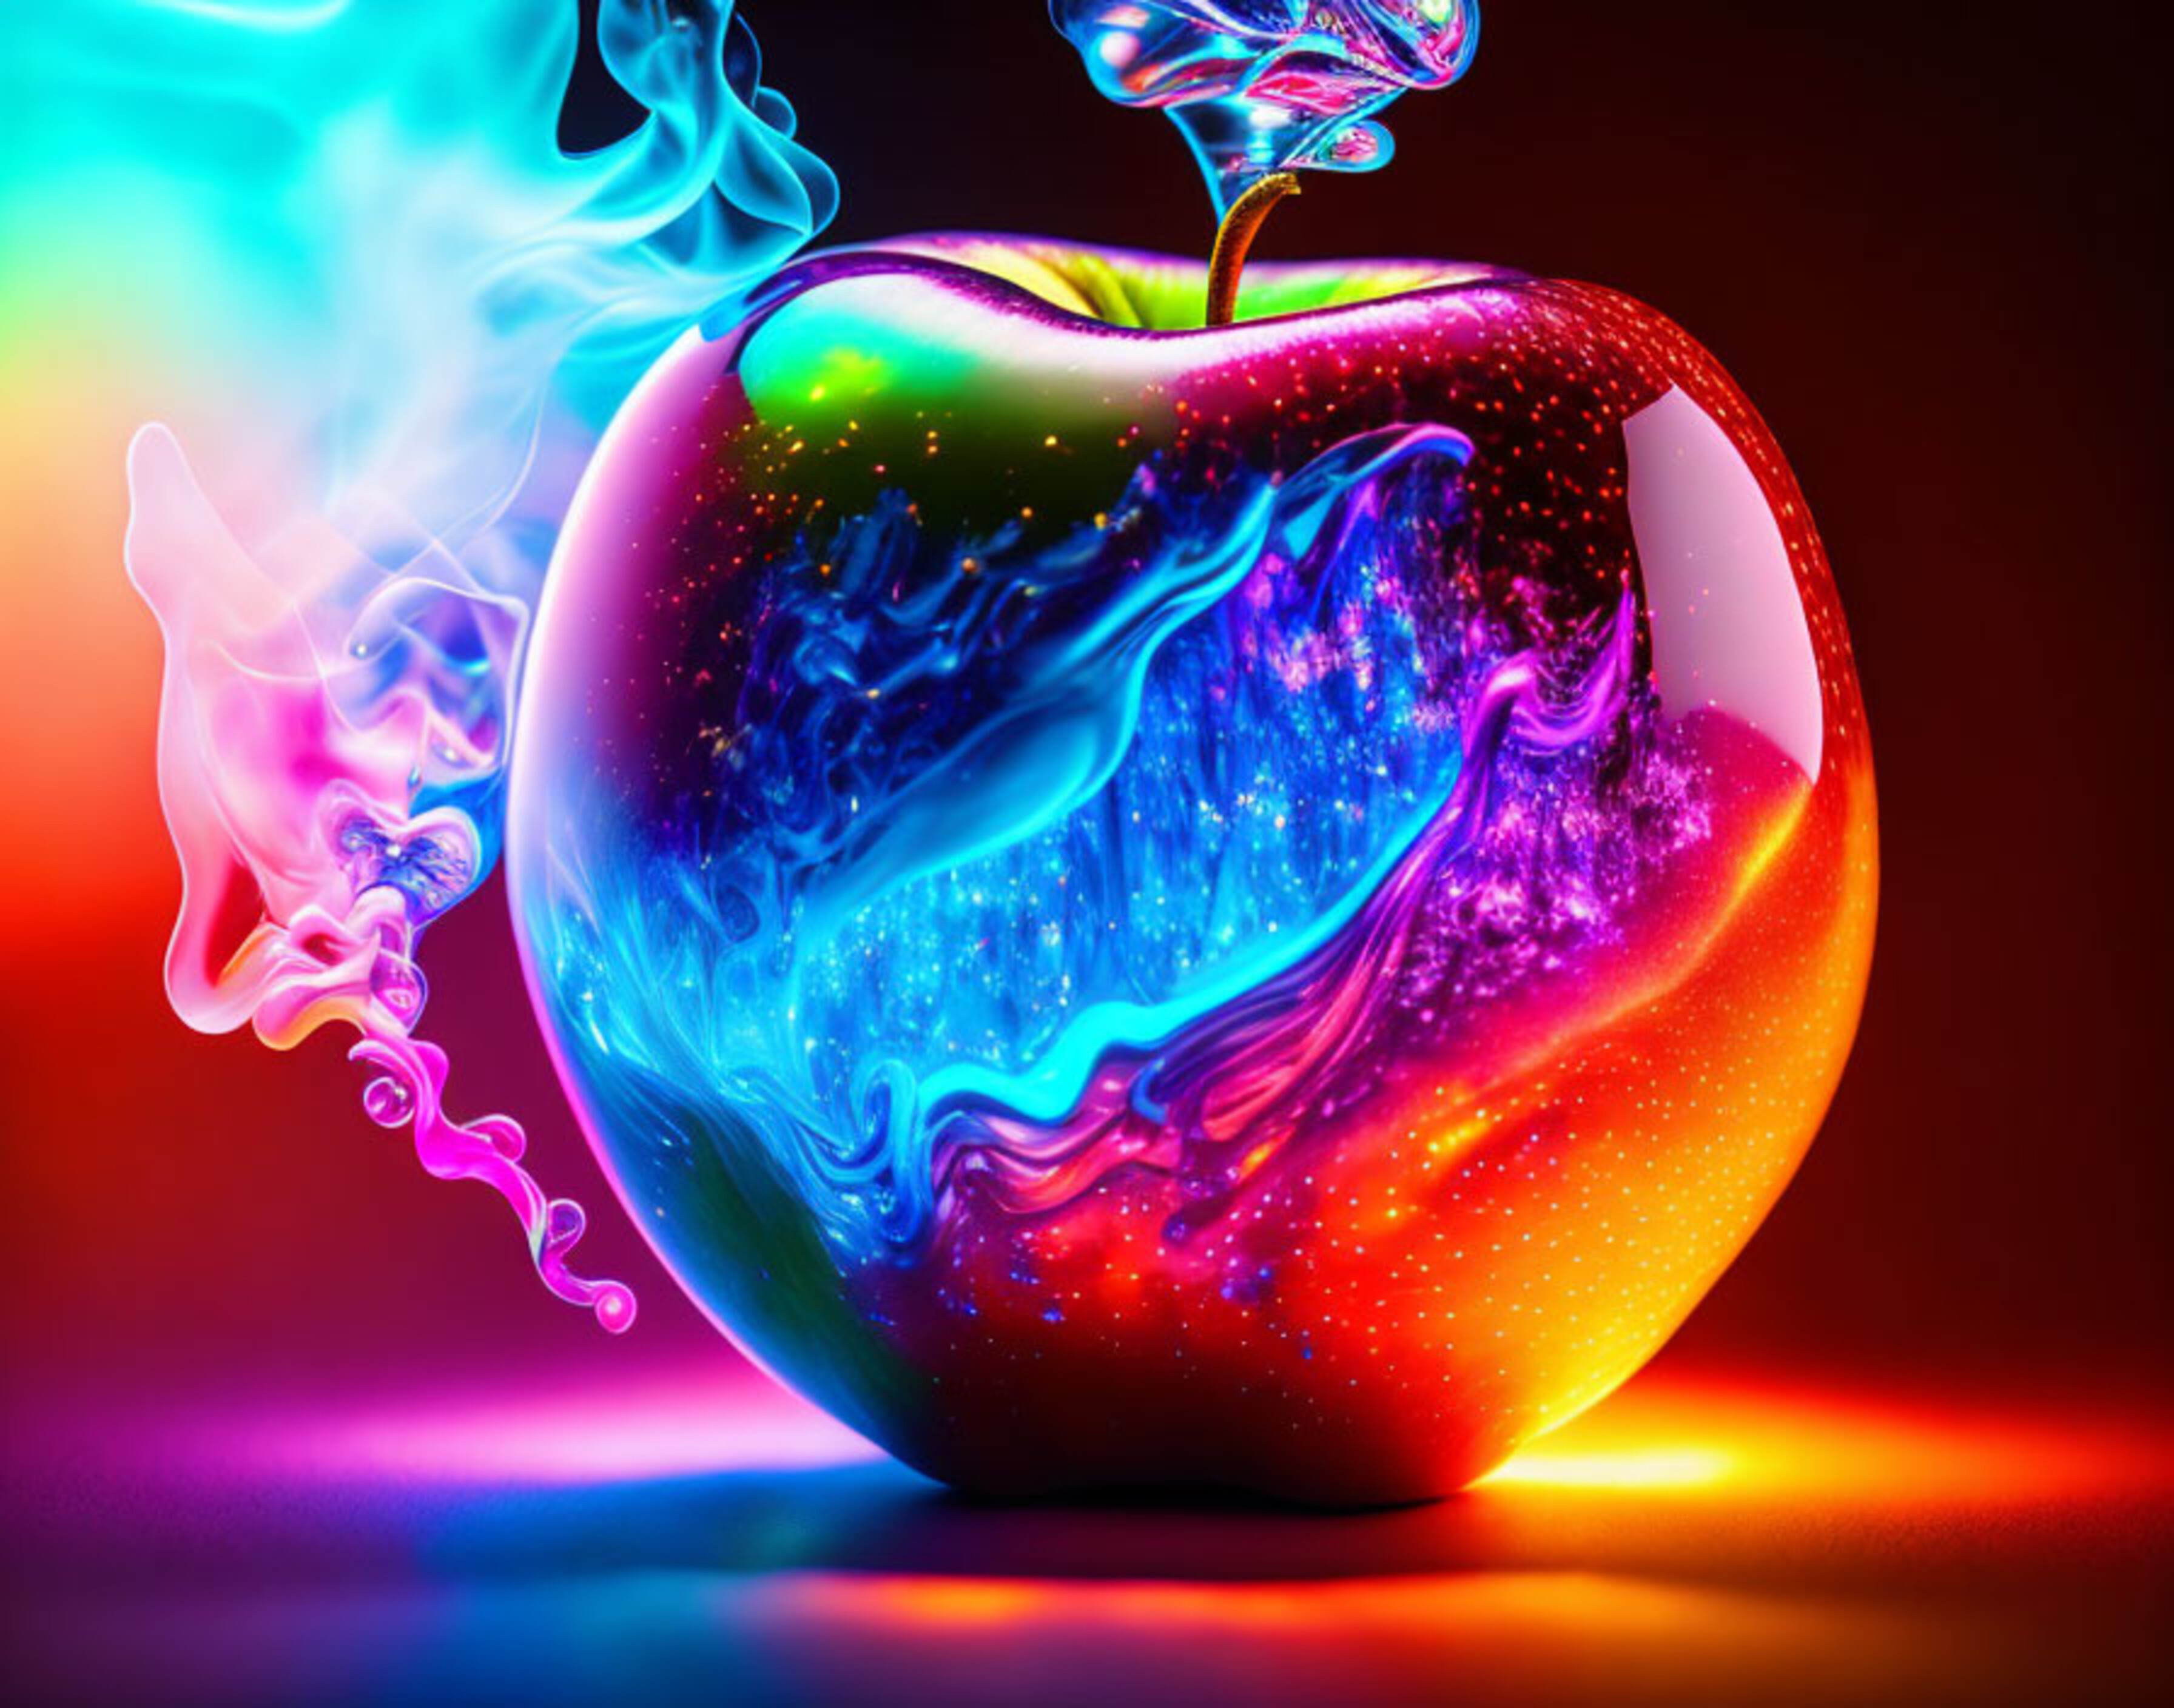 A glass apple with colored smoke inside.